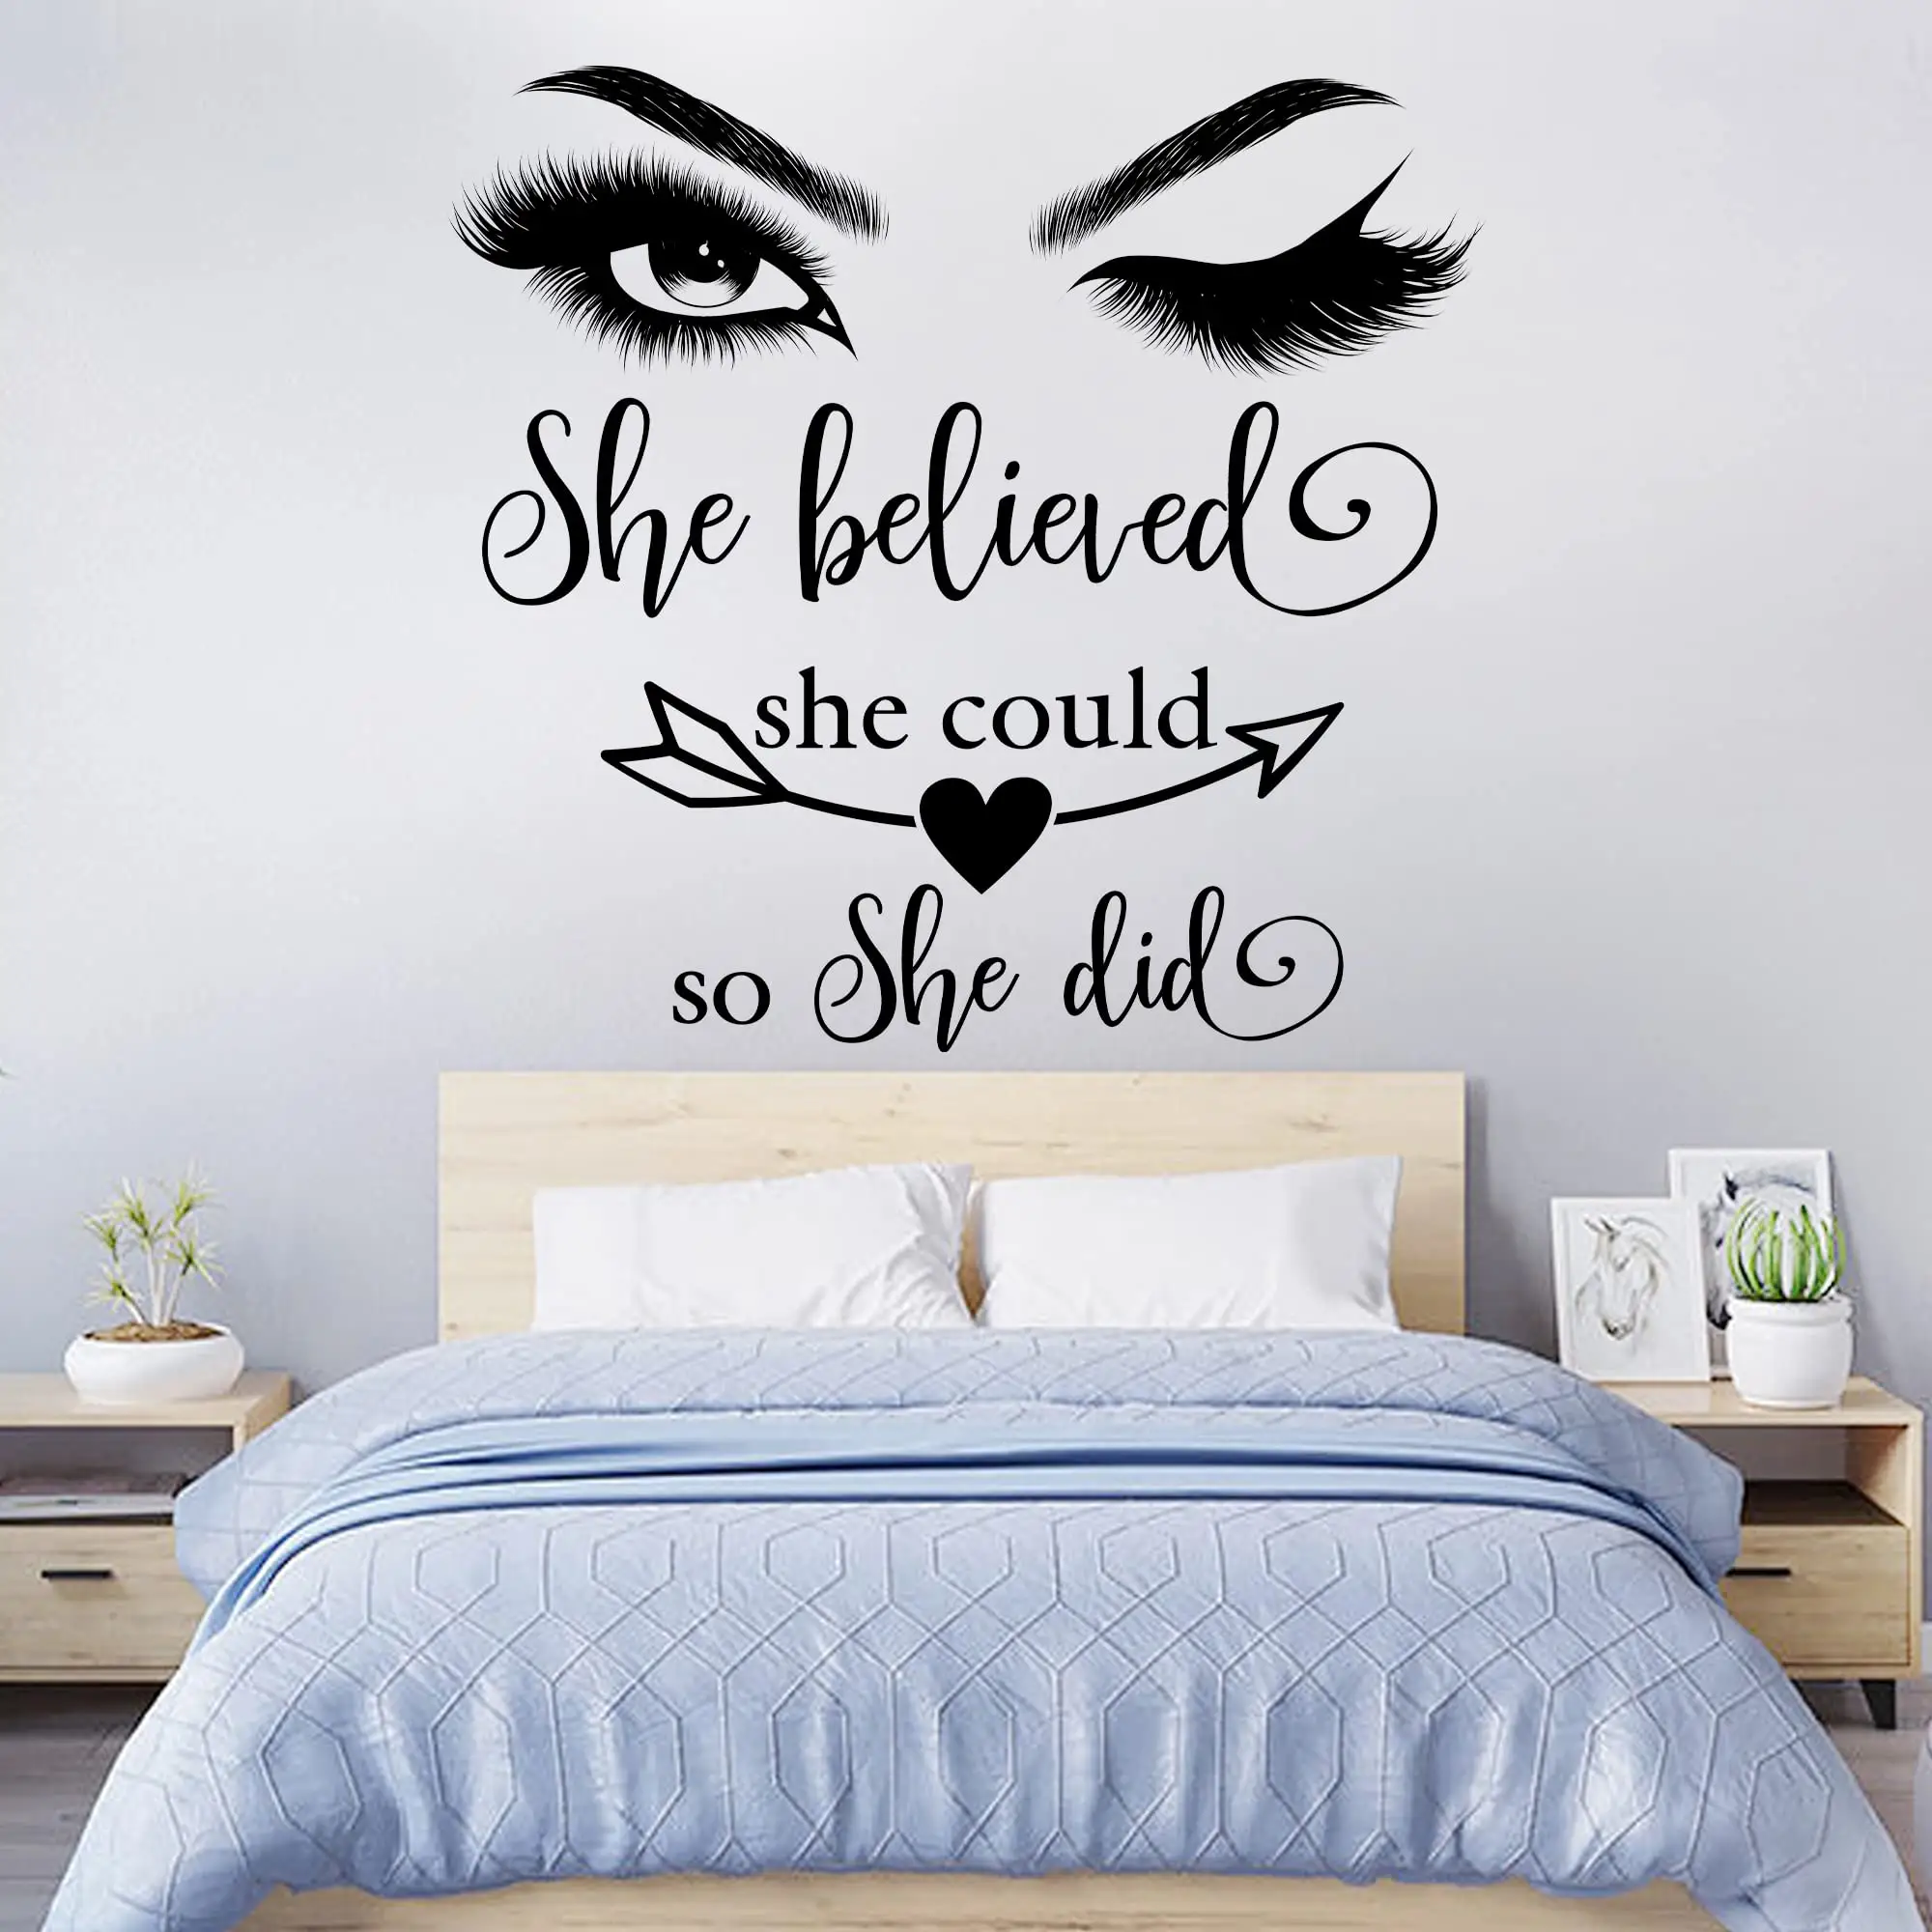 Wall decals for bedroom